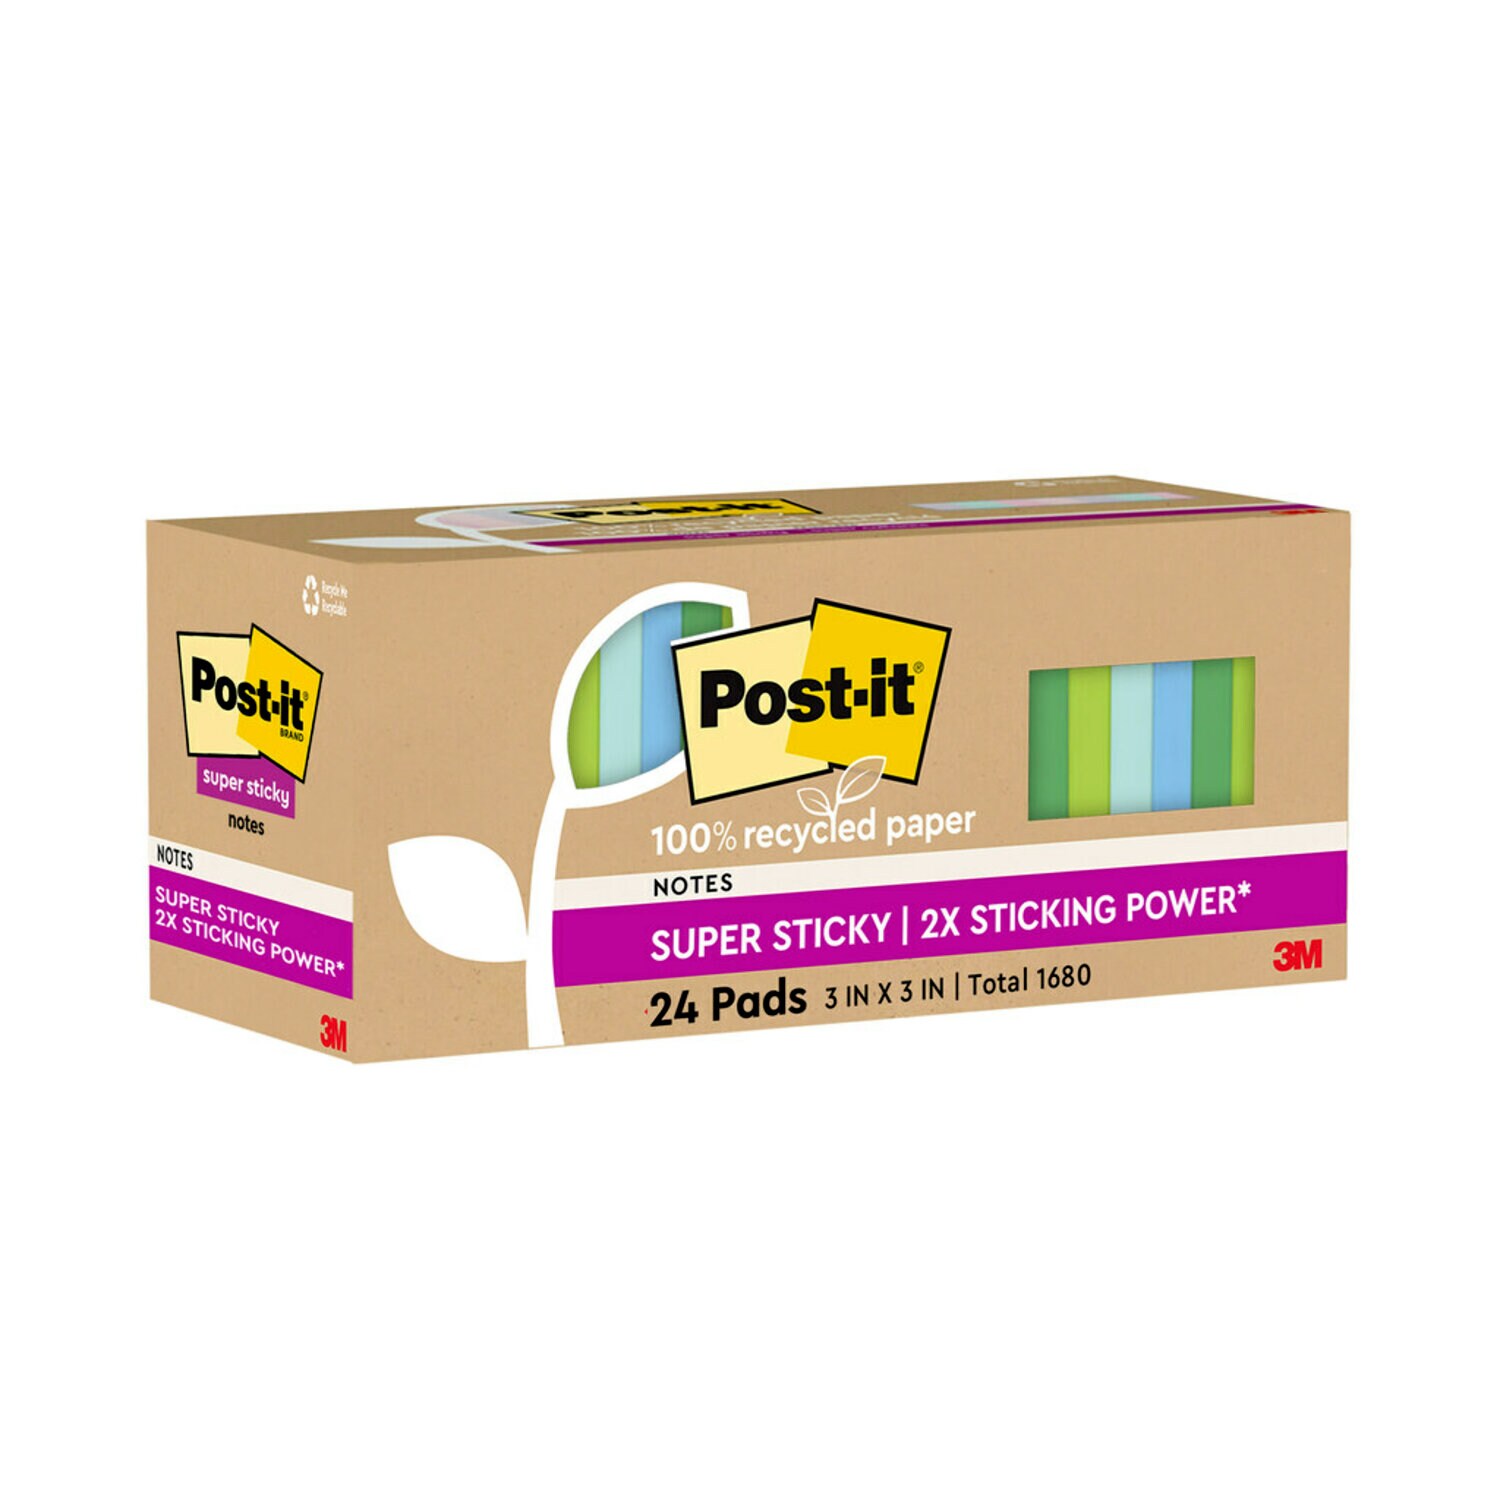 7100290345 - Post-it Super Sticky Recycled Notes 654R-24SST-CP, 3 in x 3 in (76 mm x 76 mm)